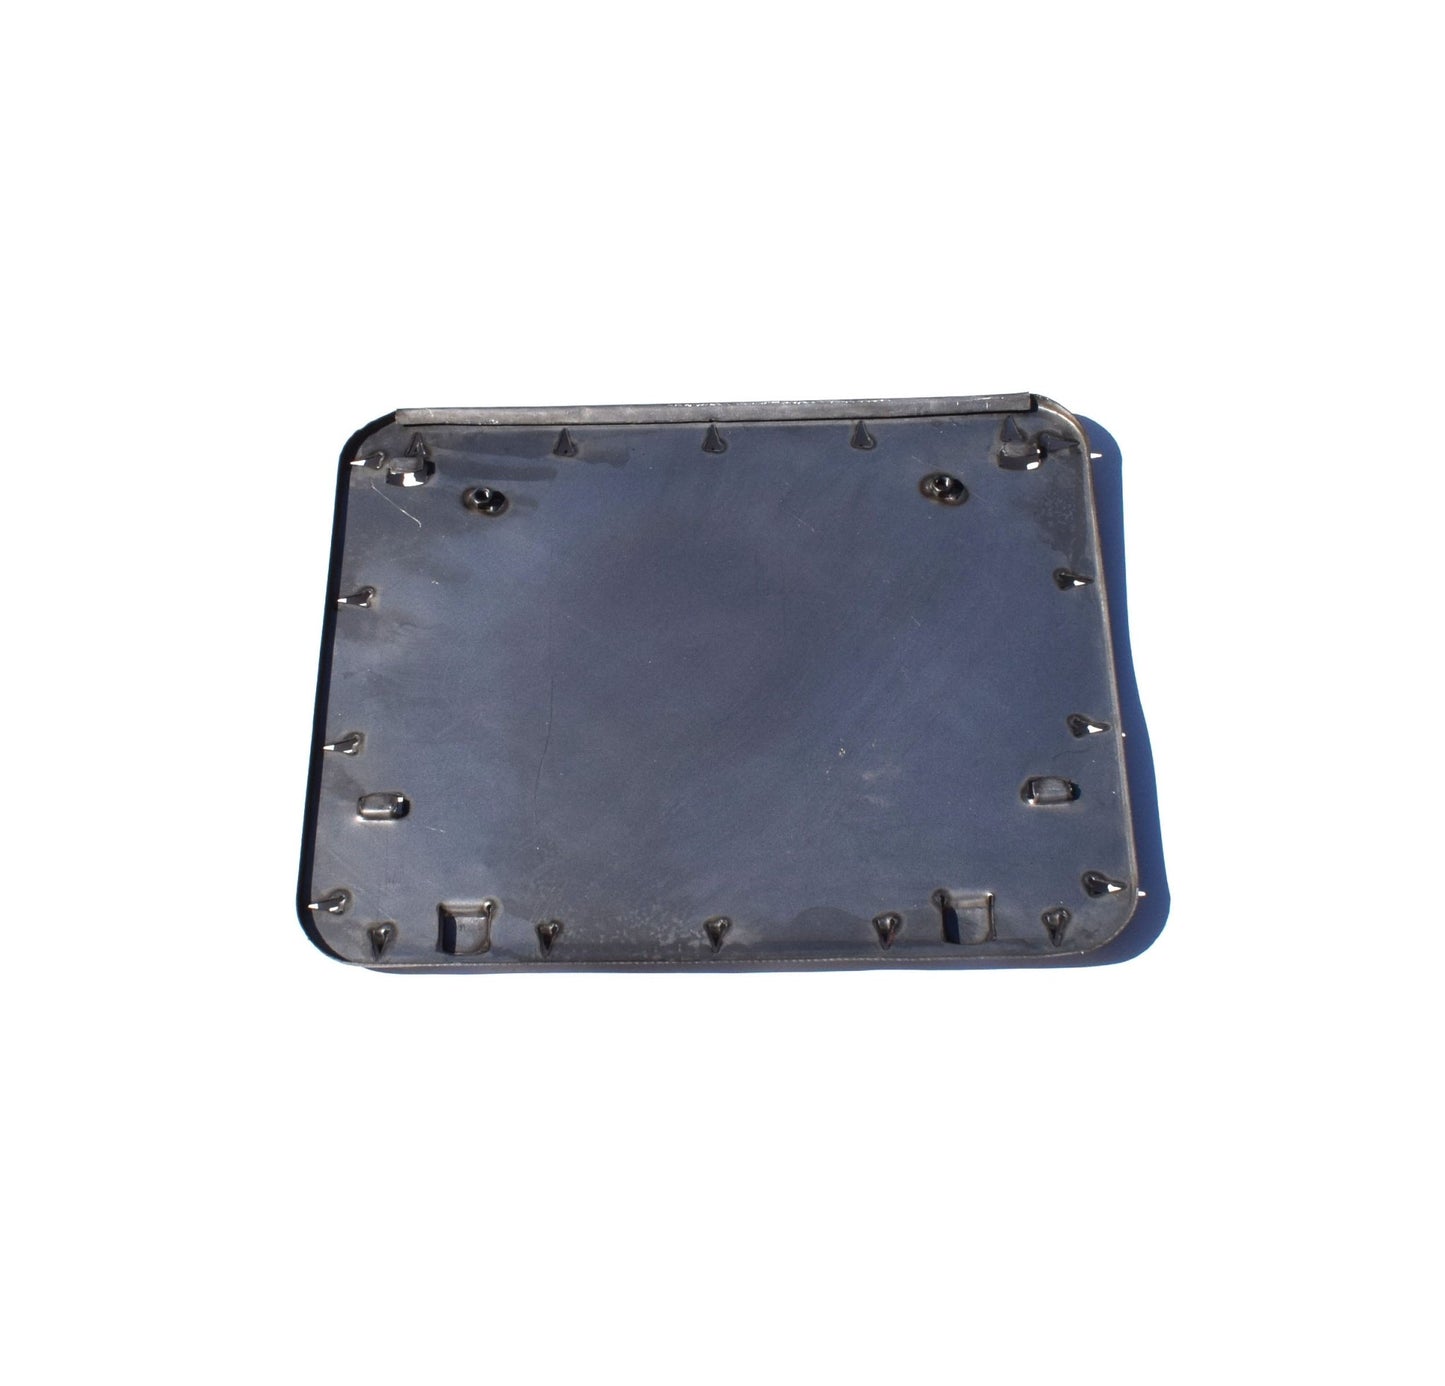 Seat Pan, Bottom, With Upholstery Hooks, 1946-1964, Willys and Jeep, CJ-2A, CJ-3A, CJ-3B, Driver or Passenger - The JeepsterMan